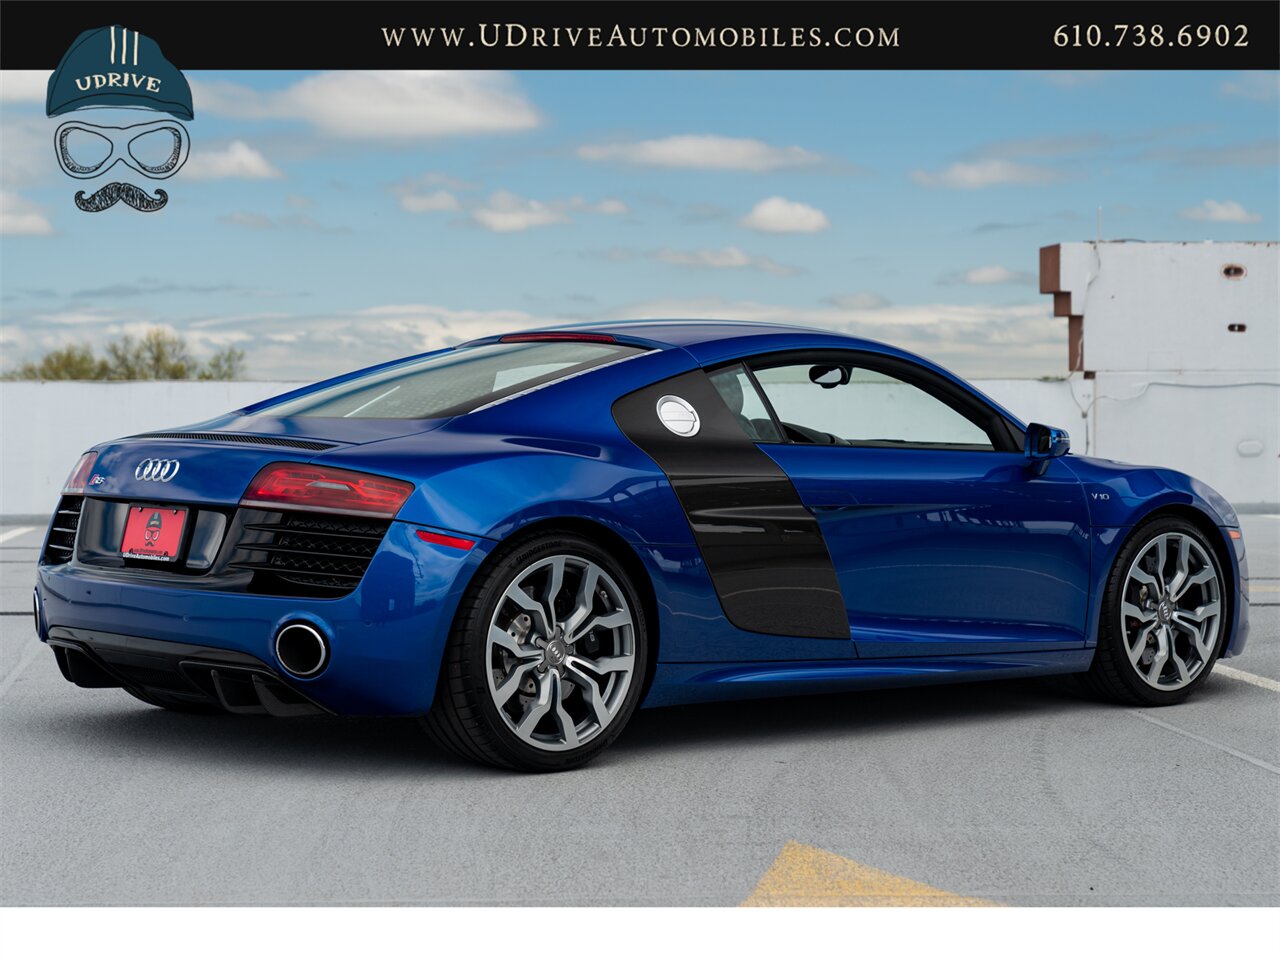 2015 Audi R8 5.2 V10 Quattro 6 Speed Manual 10k Miles  Diamond Stitched Leather 1 of 2 - Photo 18 - West Chester, PA 19382